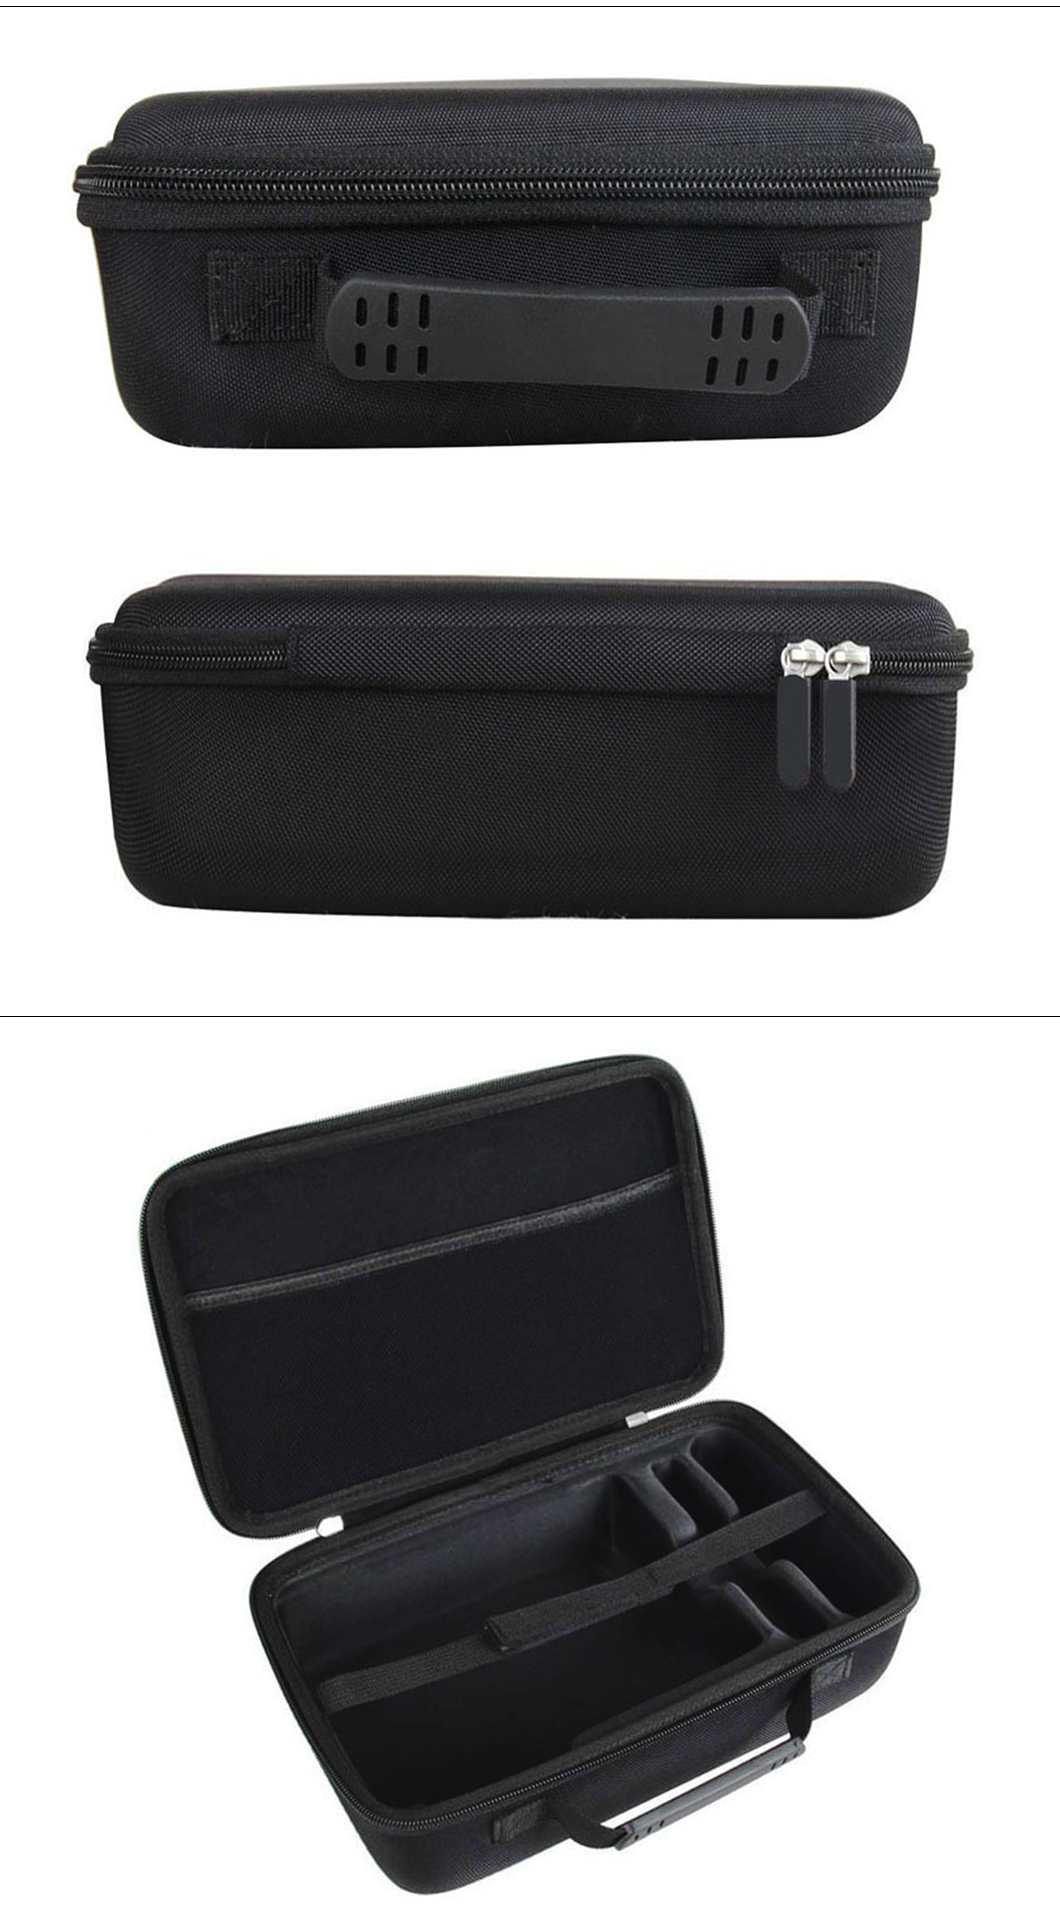 Portable Projector Case Hard EVA Travel Case for Video Projector and Accessories(图2)